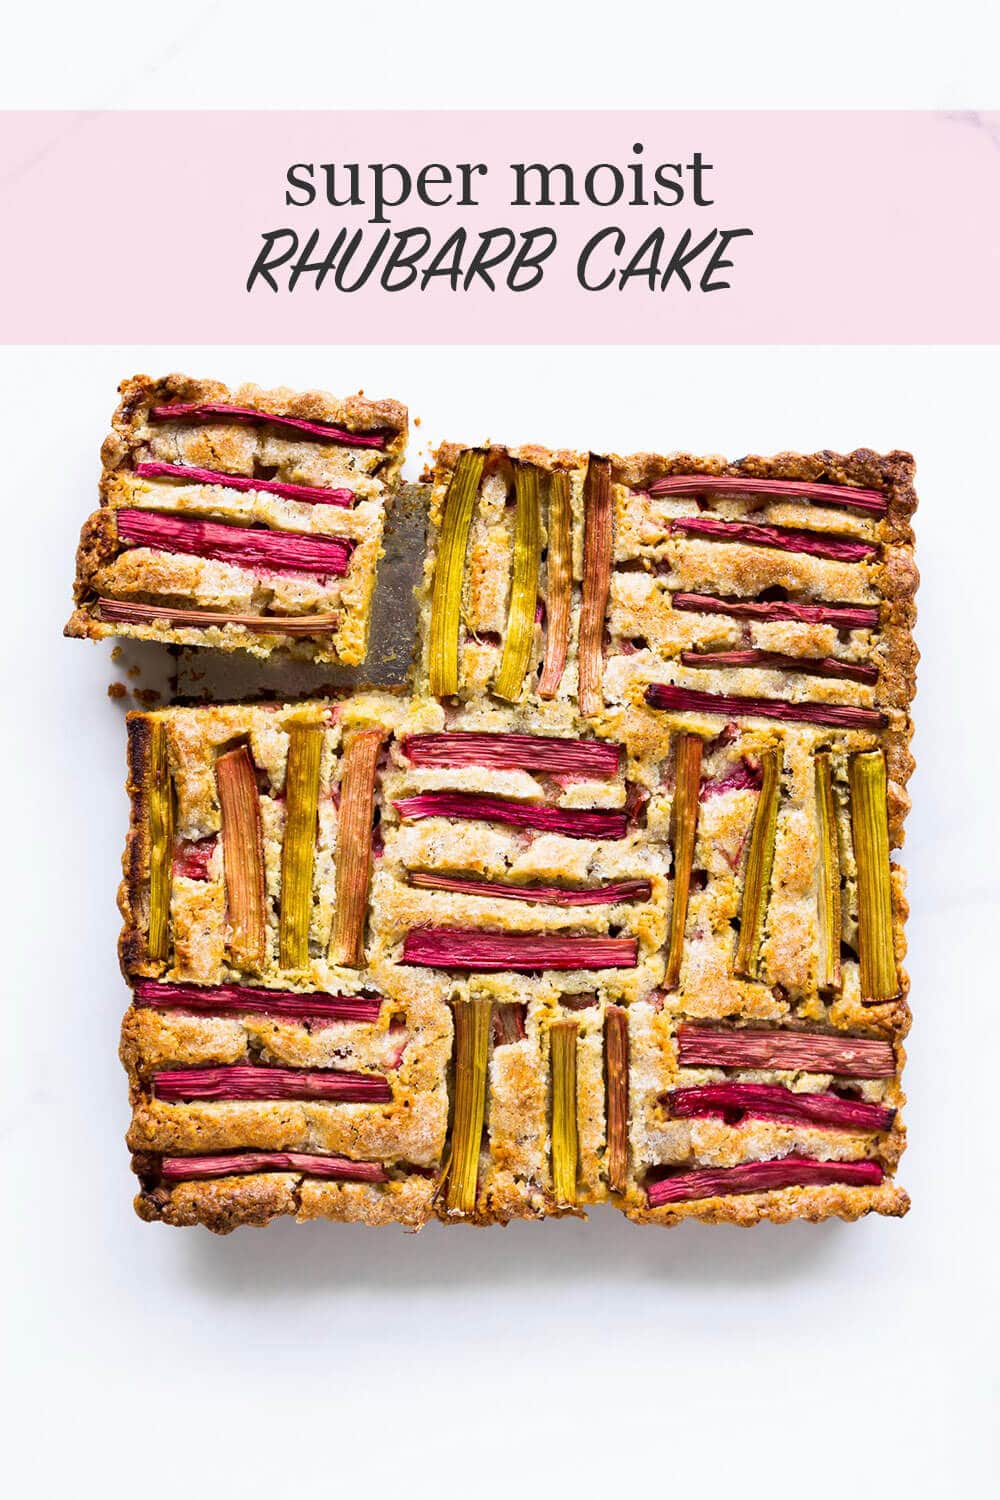 Rhubarb cake with rhubarb arrangement in woven pattern